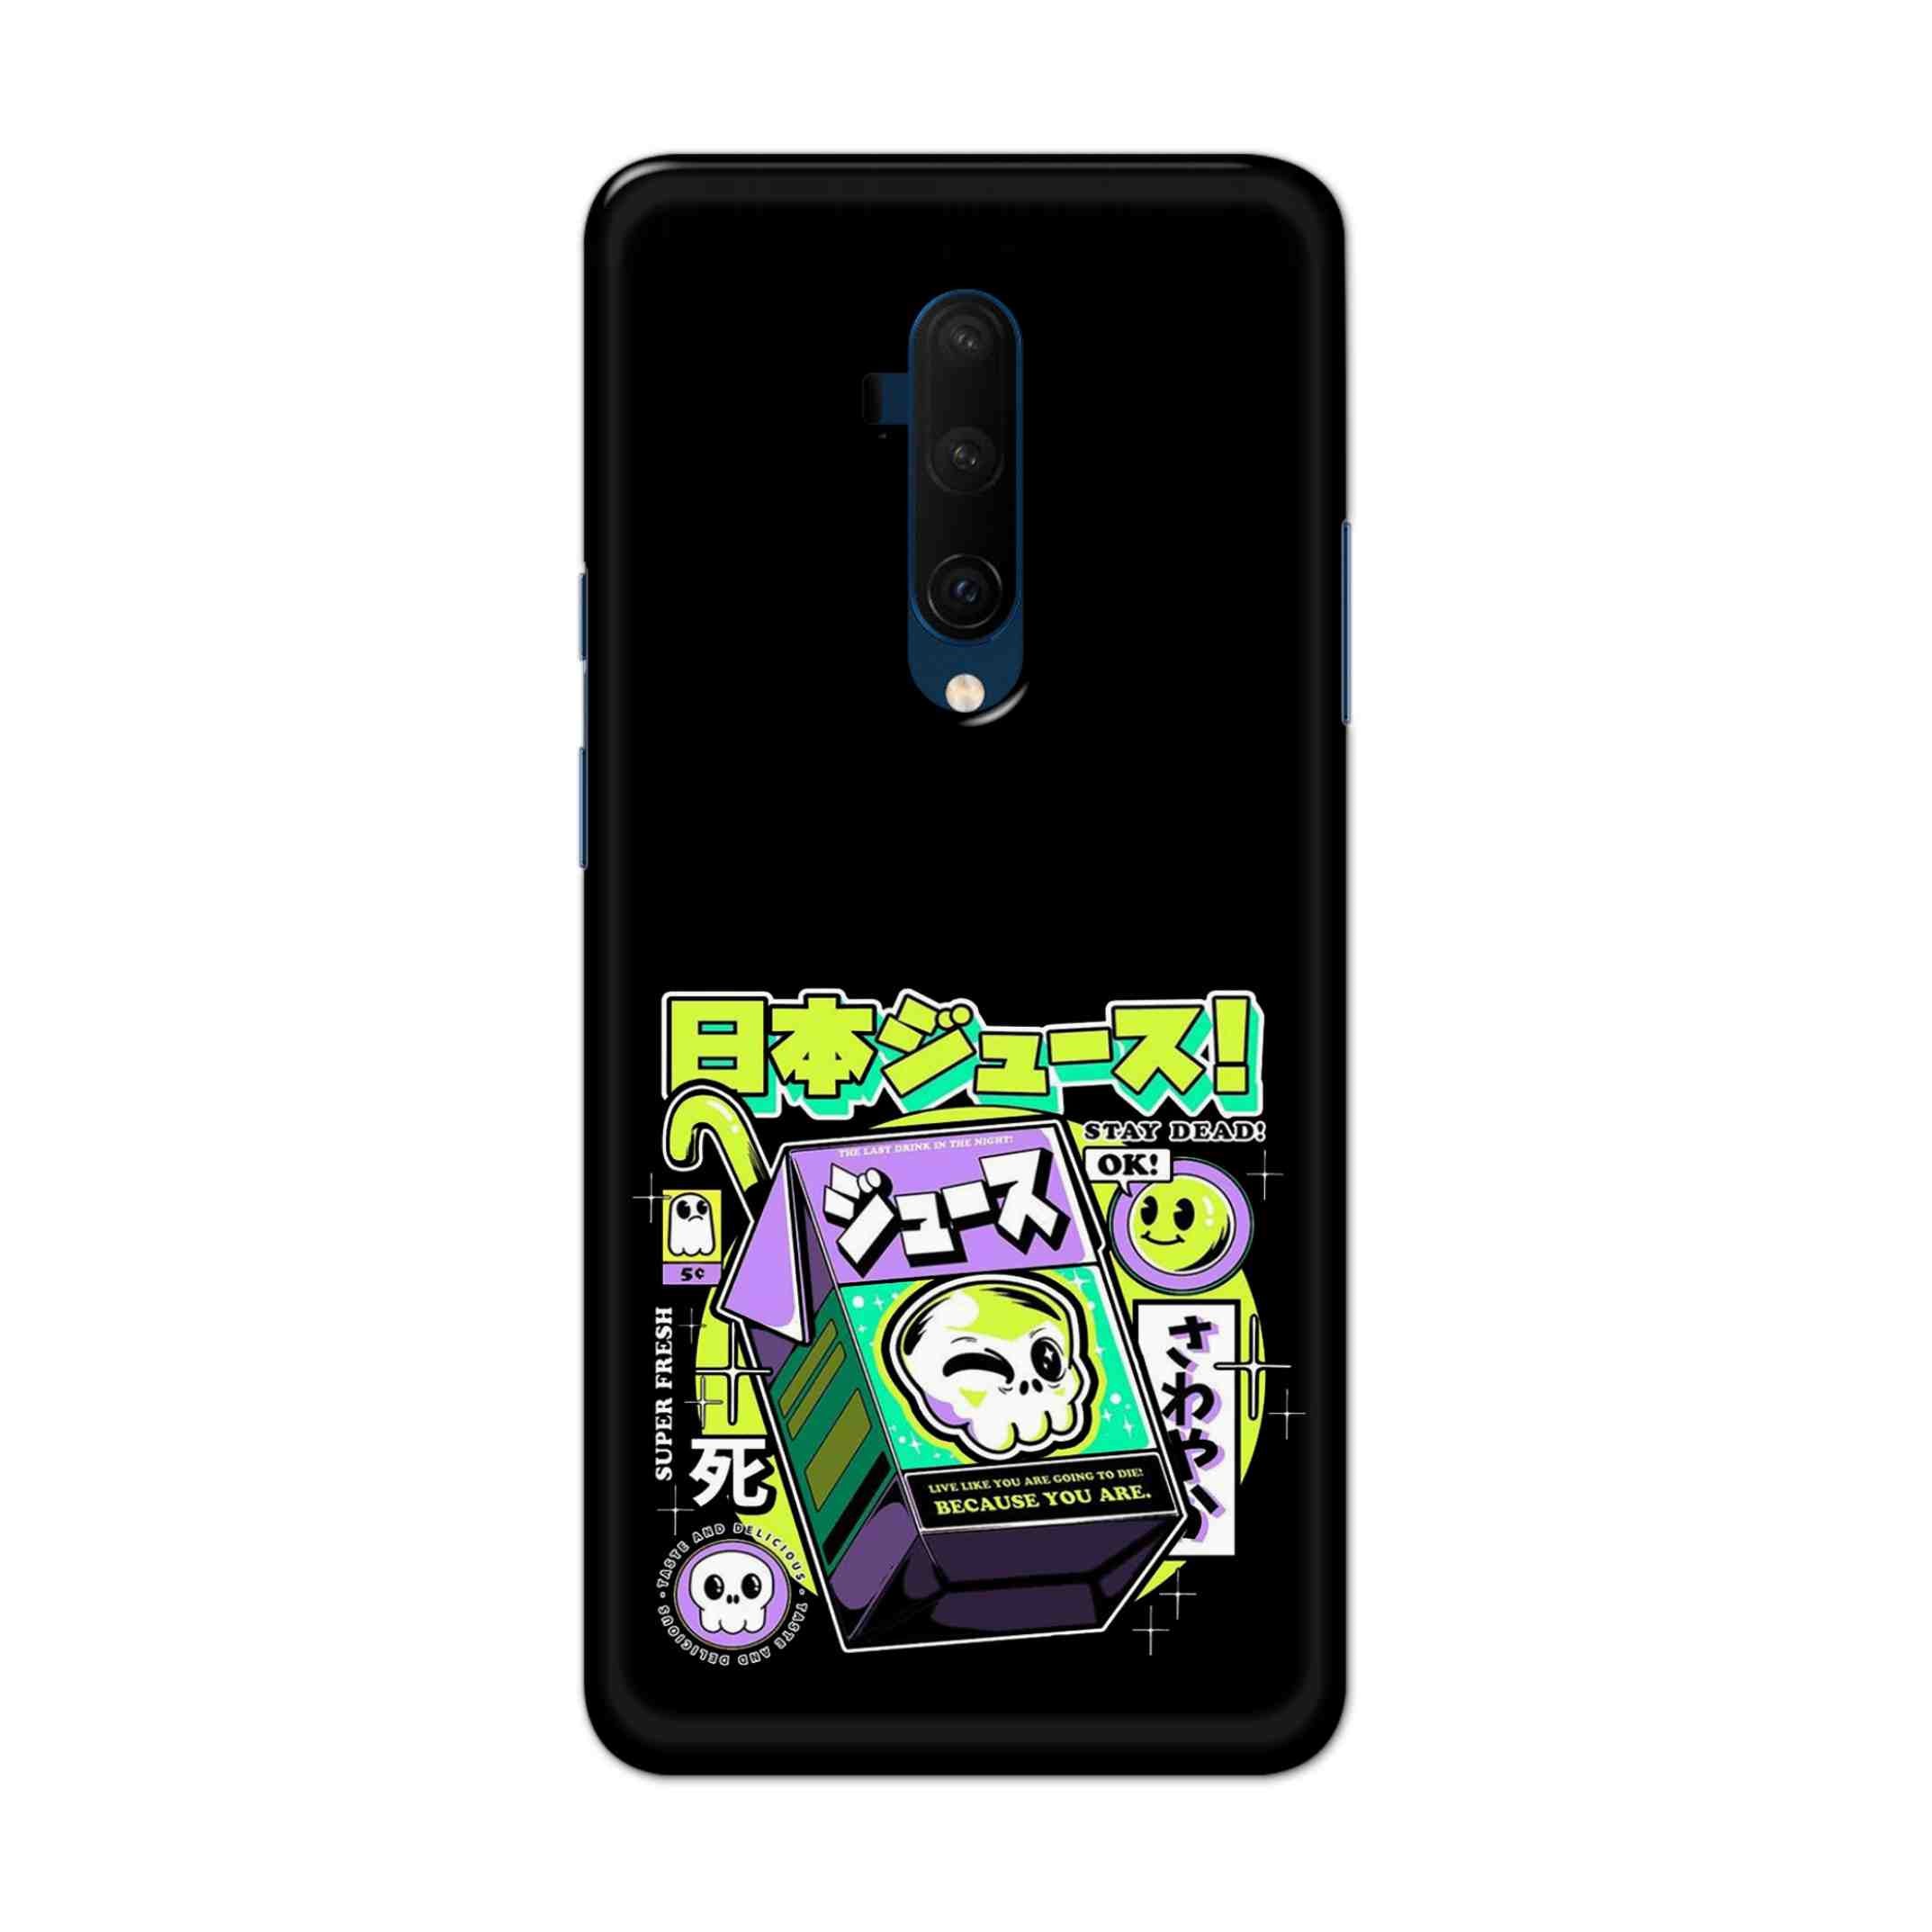 Buy Because You Are Hard Back Mobile Phone Case Cover For OnePlus 7T Pro Online